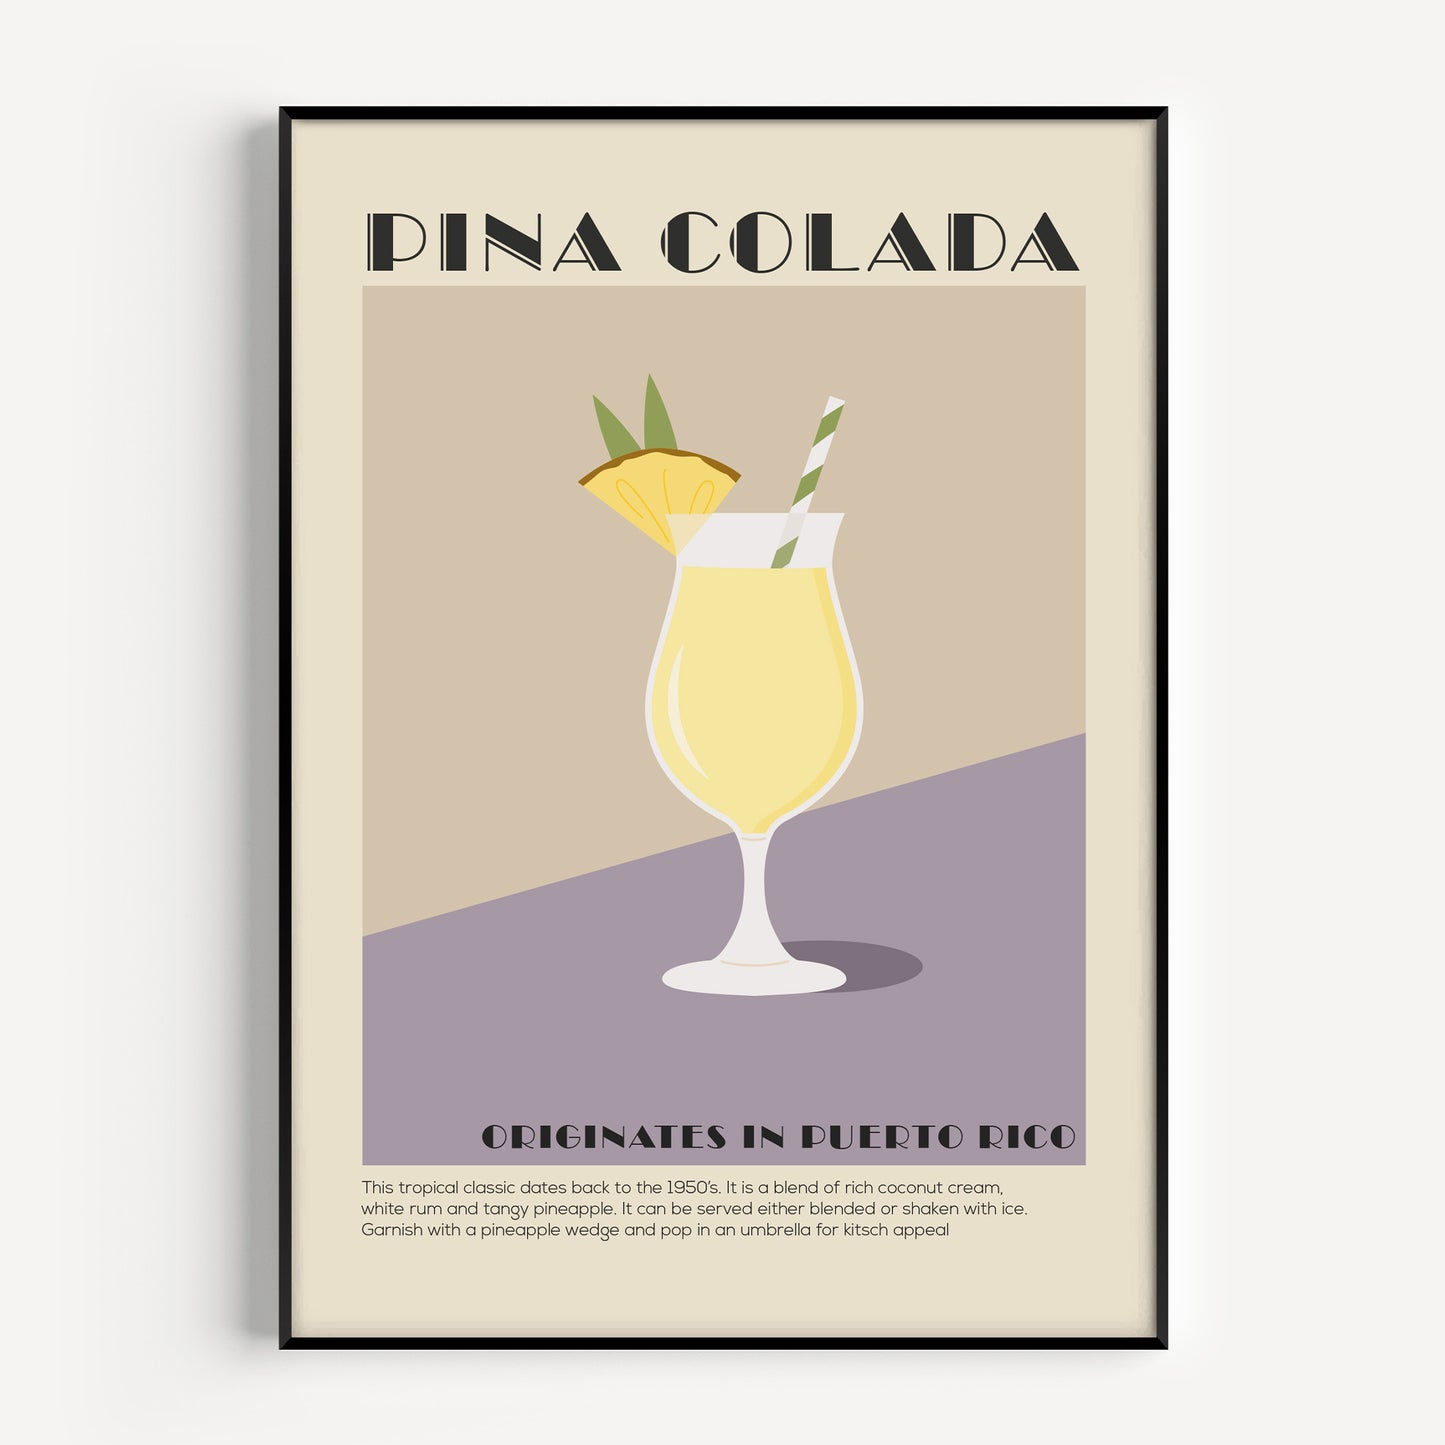 Pina colada cocktail print in an art deco style